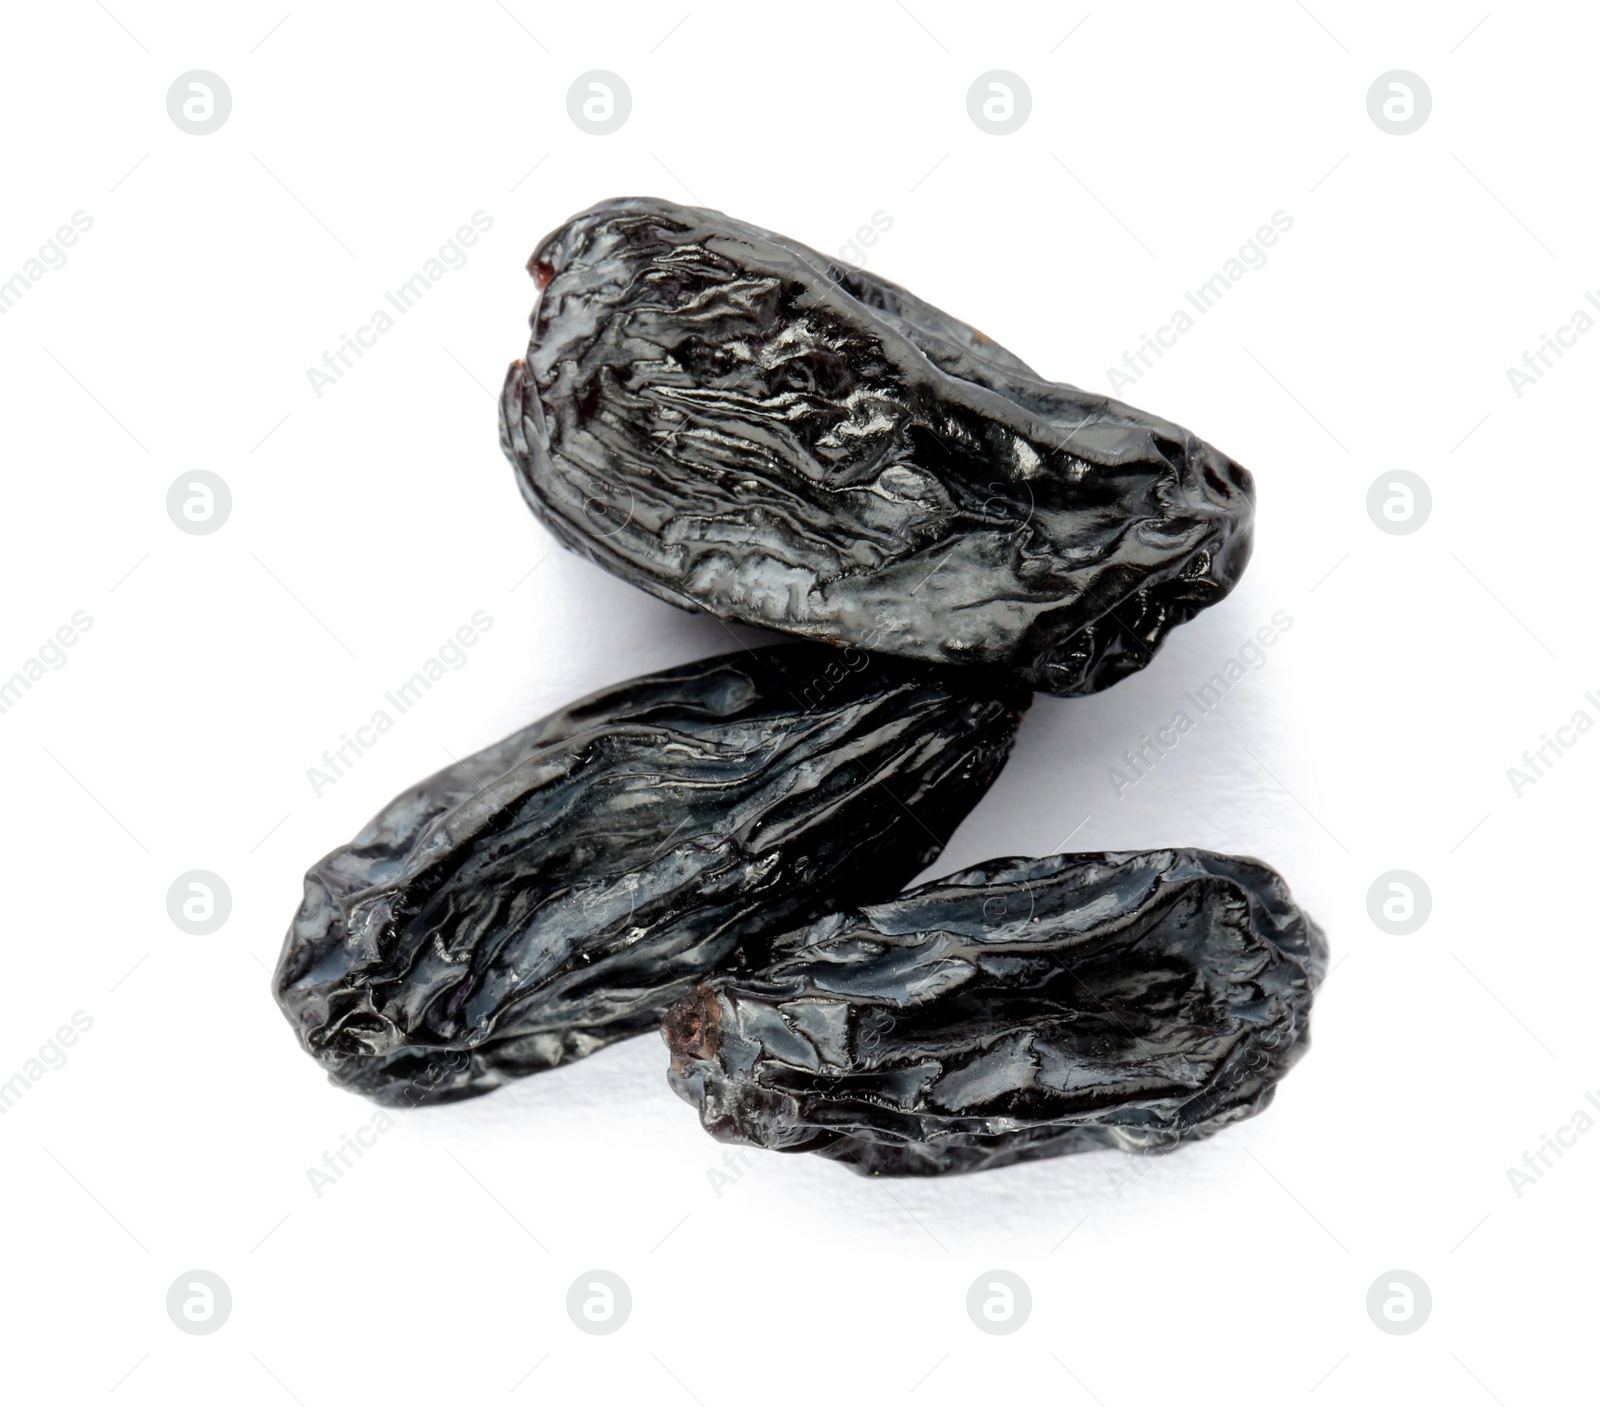 Photo of Tasty raisins on white background, top view. Healthy dried fruit